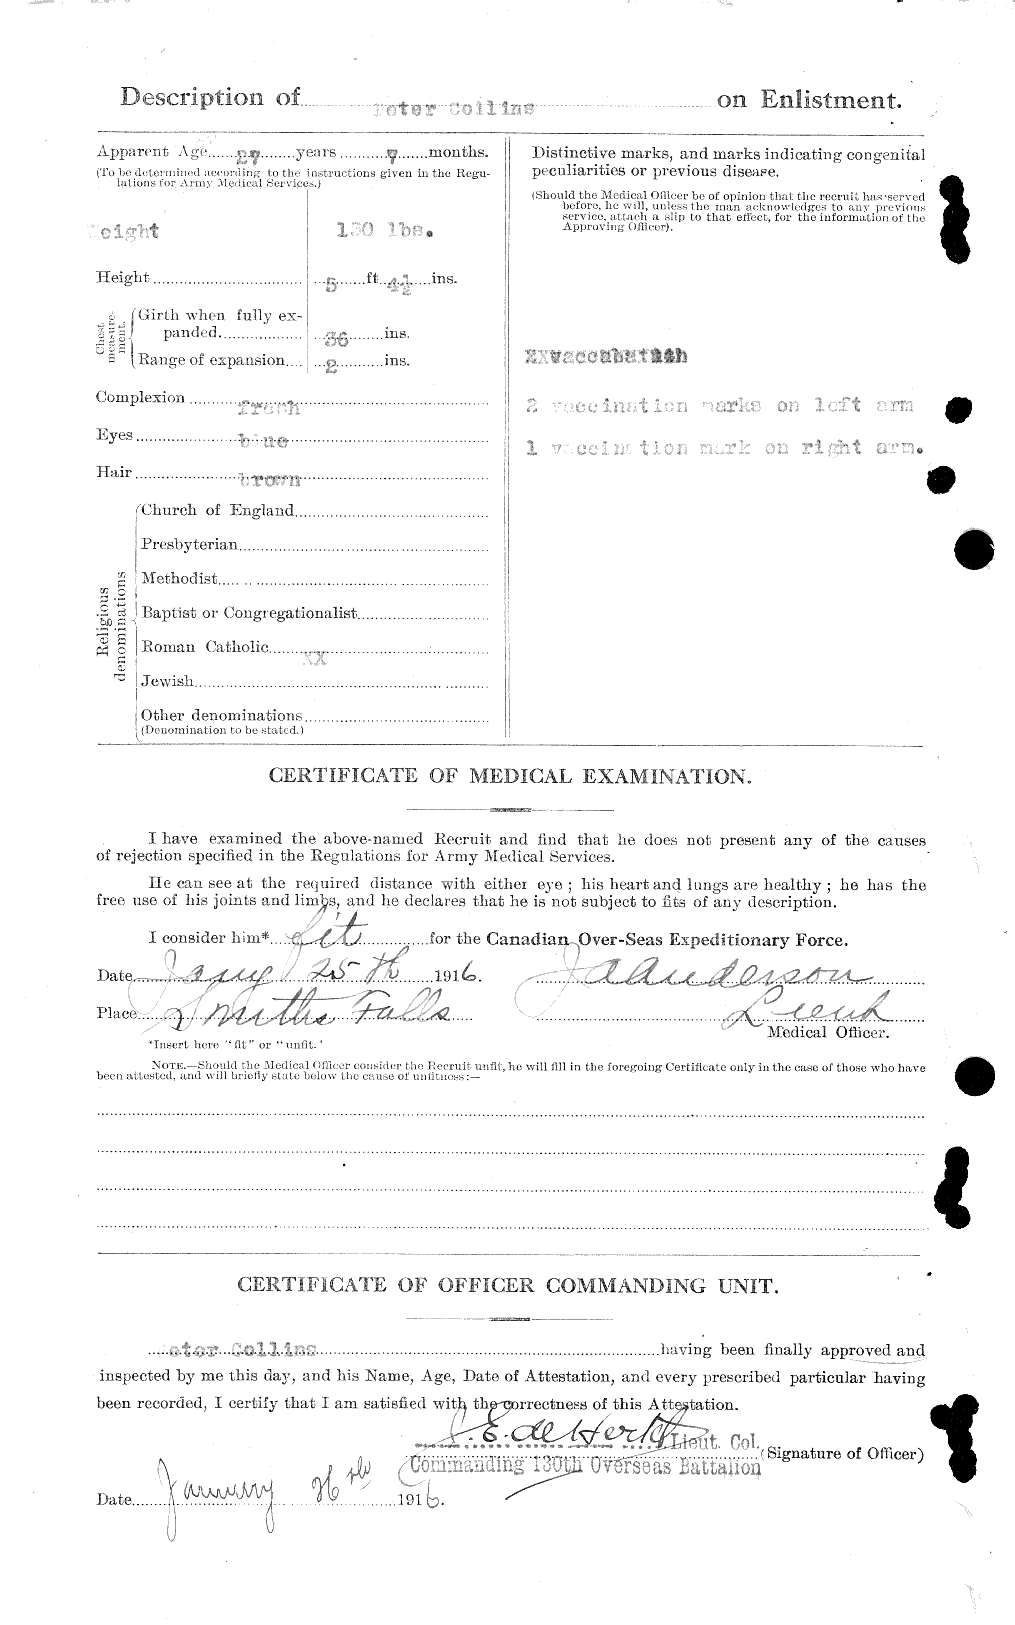 Personnel Records of the First World War - CEF 034498b